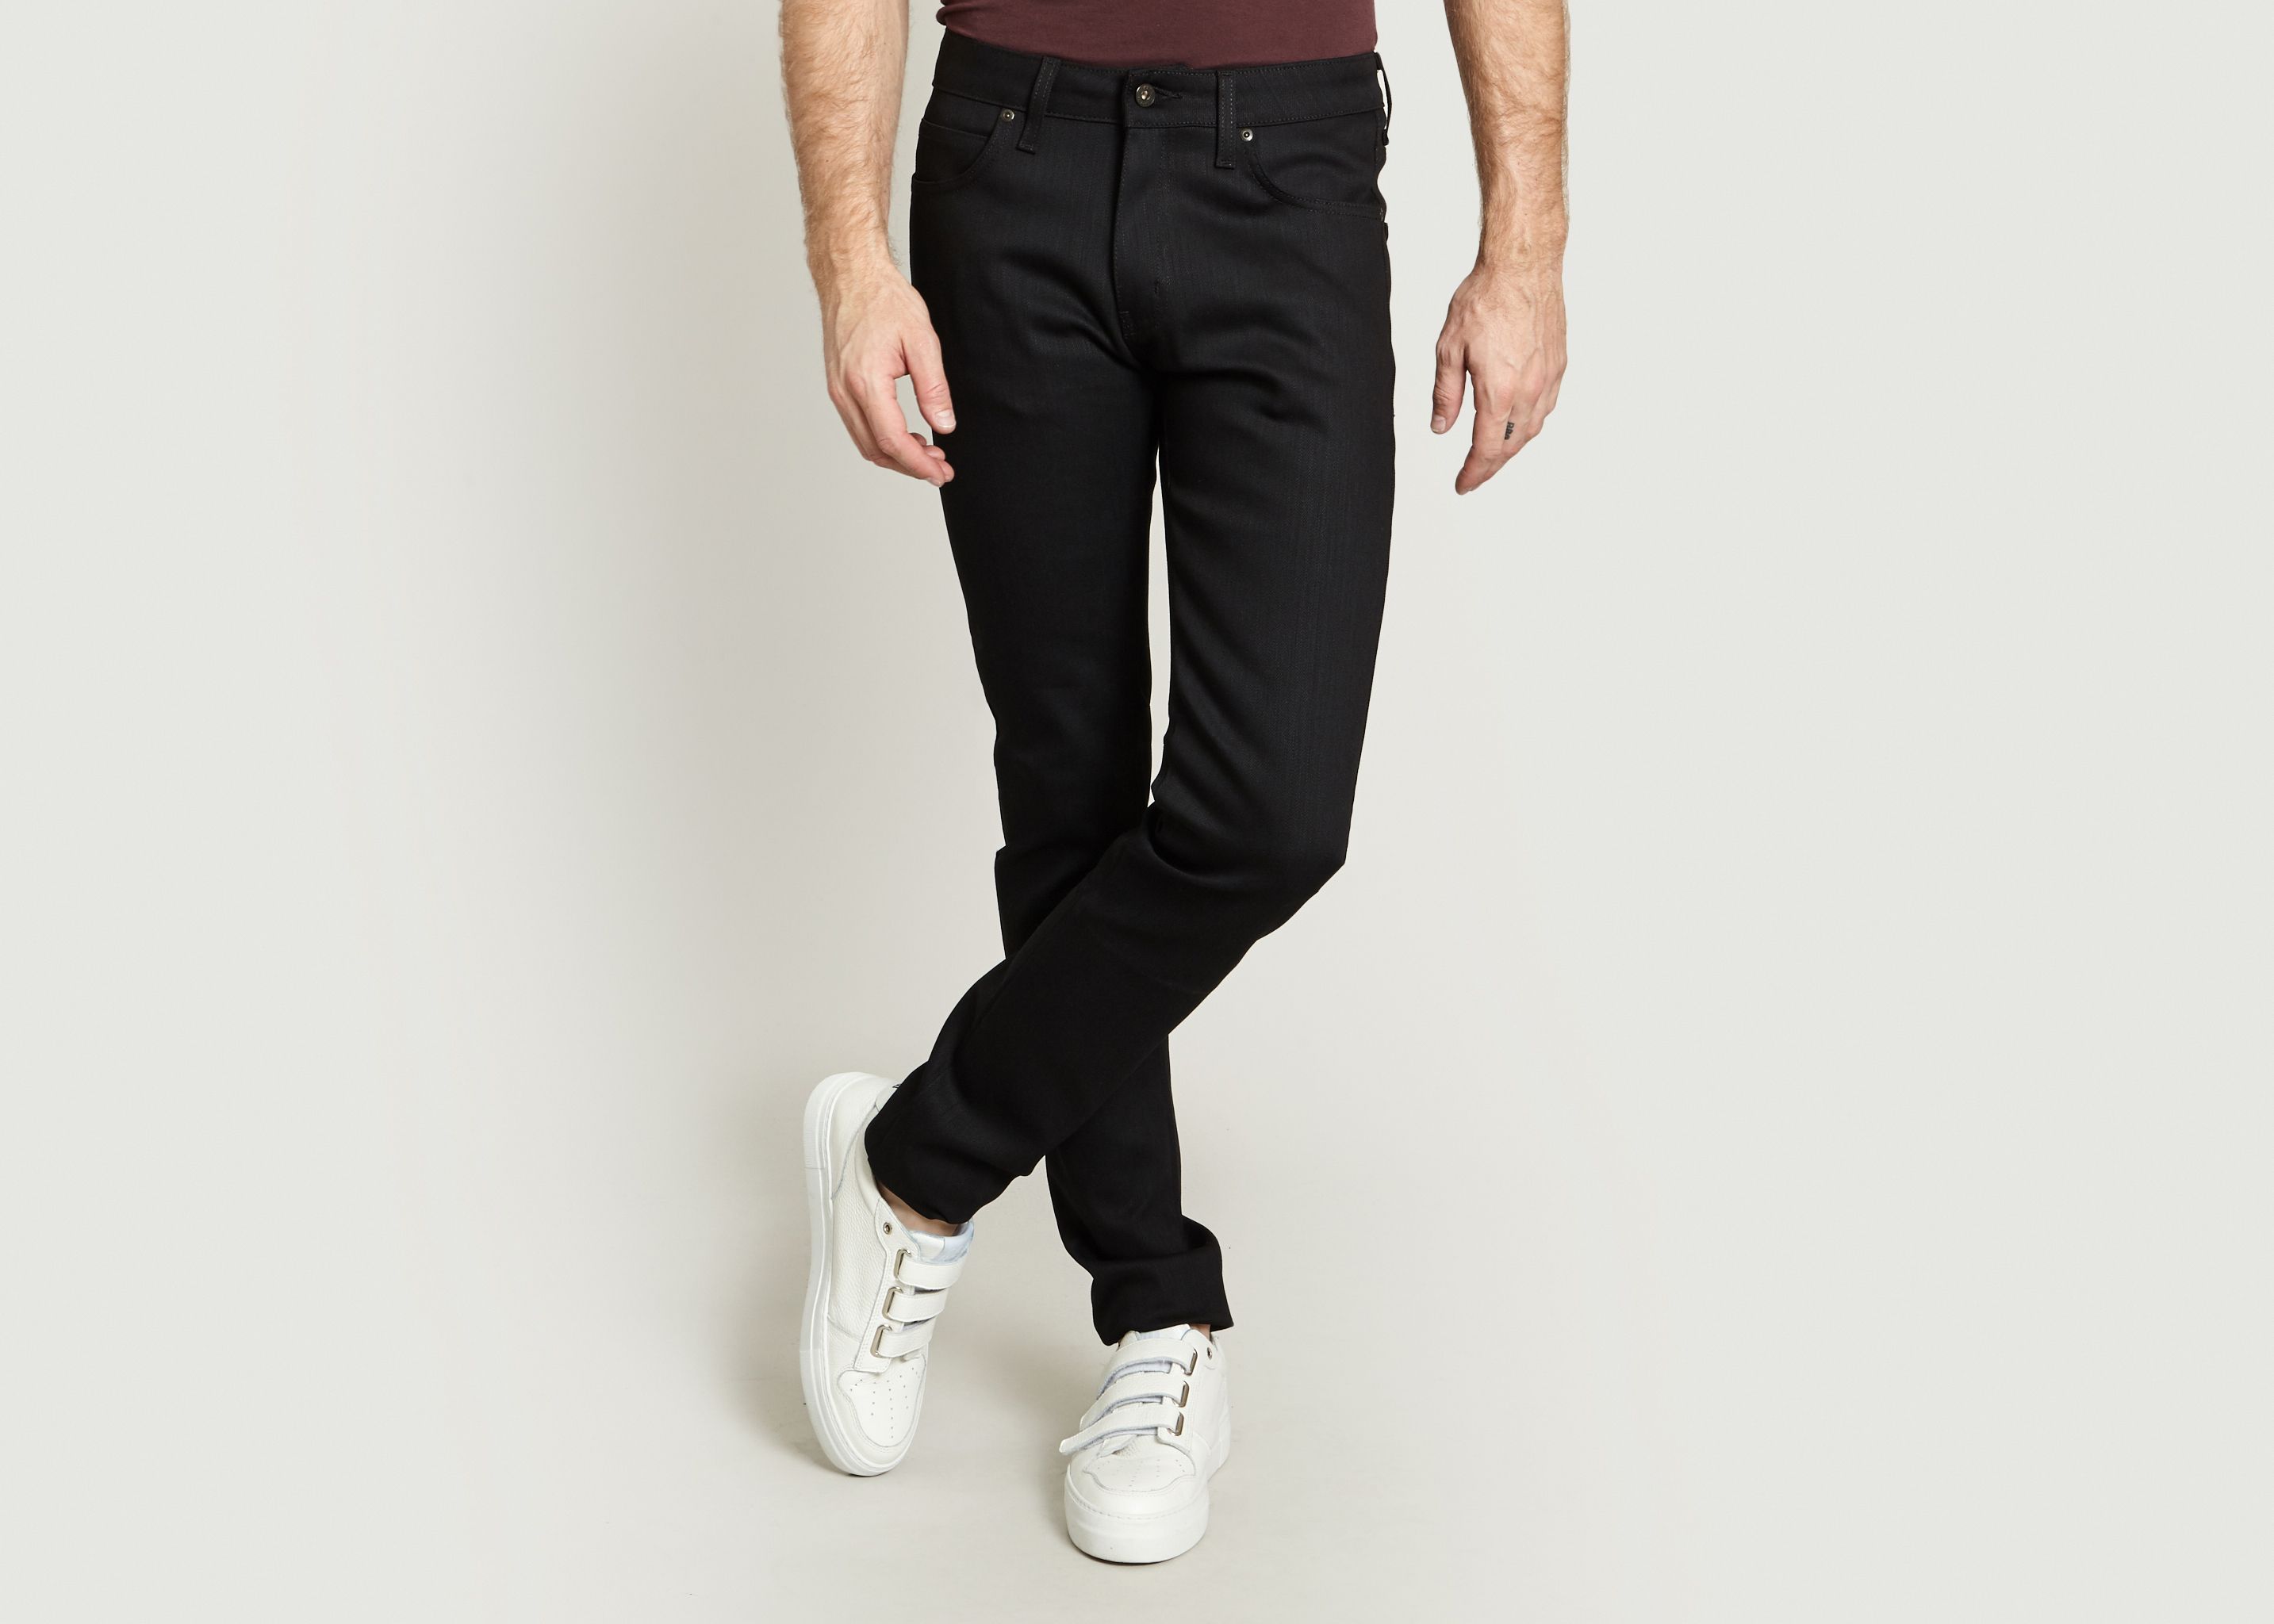 Super Skinny Guy Jeans - Naked and Famous